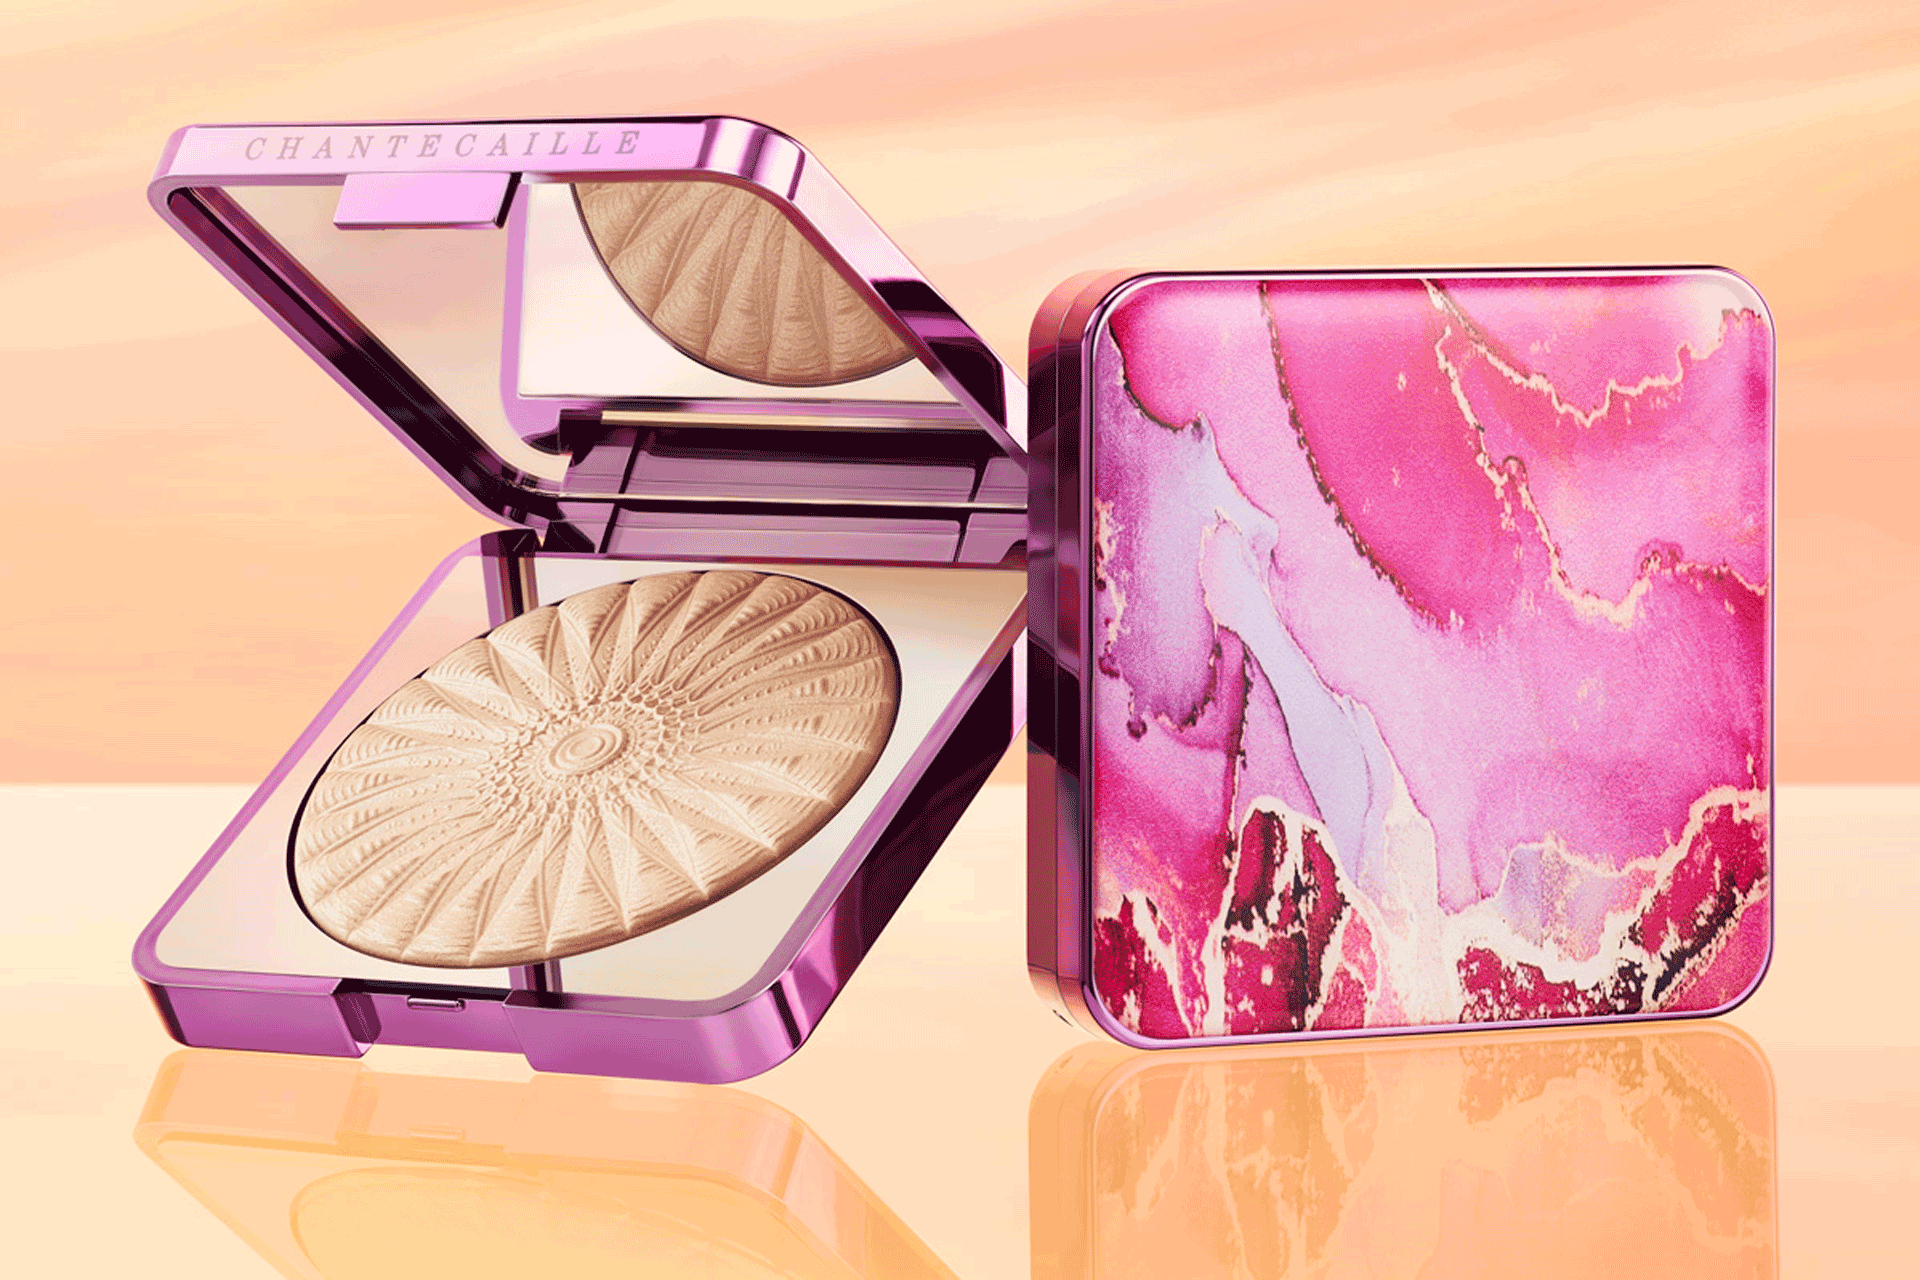 Chantecaille limited-edition highlight in pink marble packaging